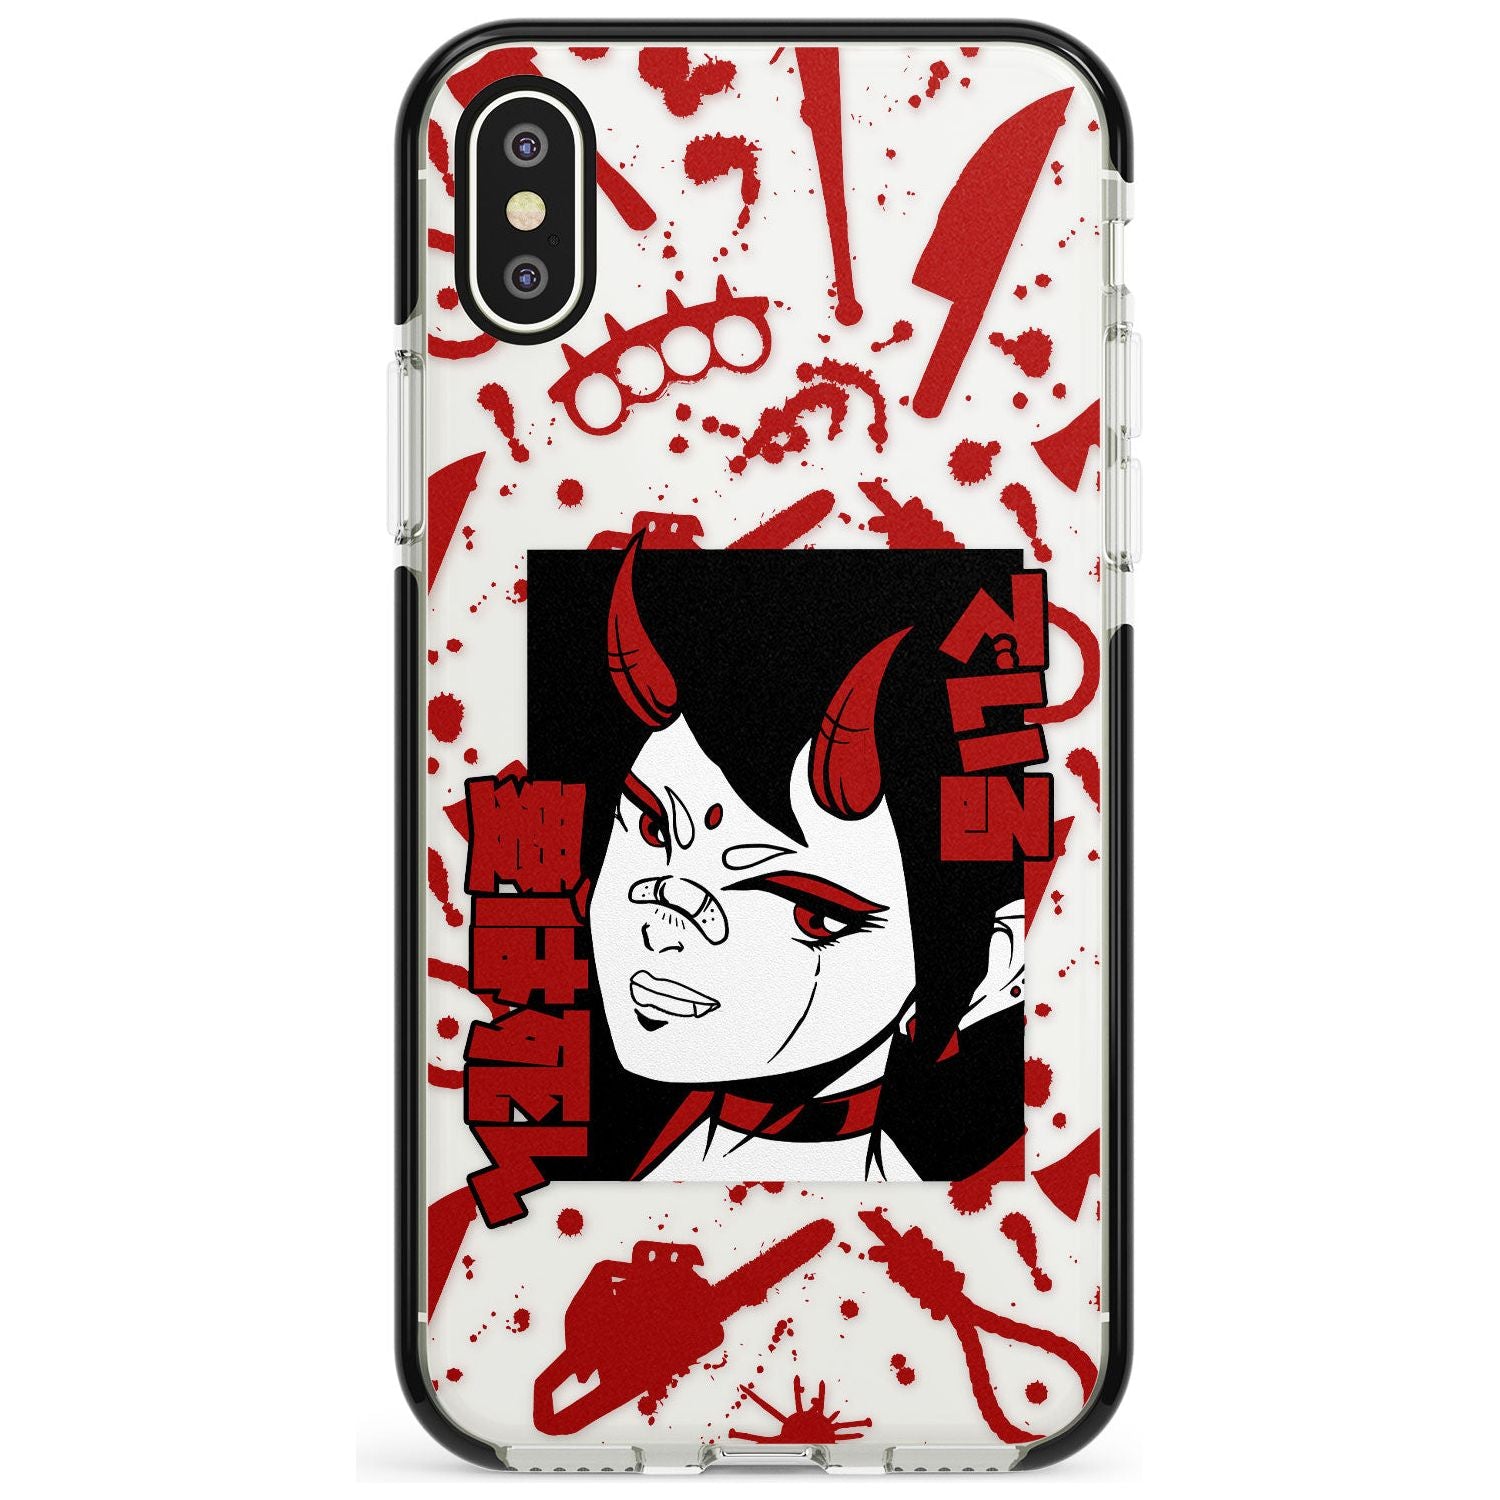 She's a Devil Black Impact Phone Case for iPhone X XS Max XR